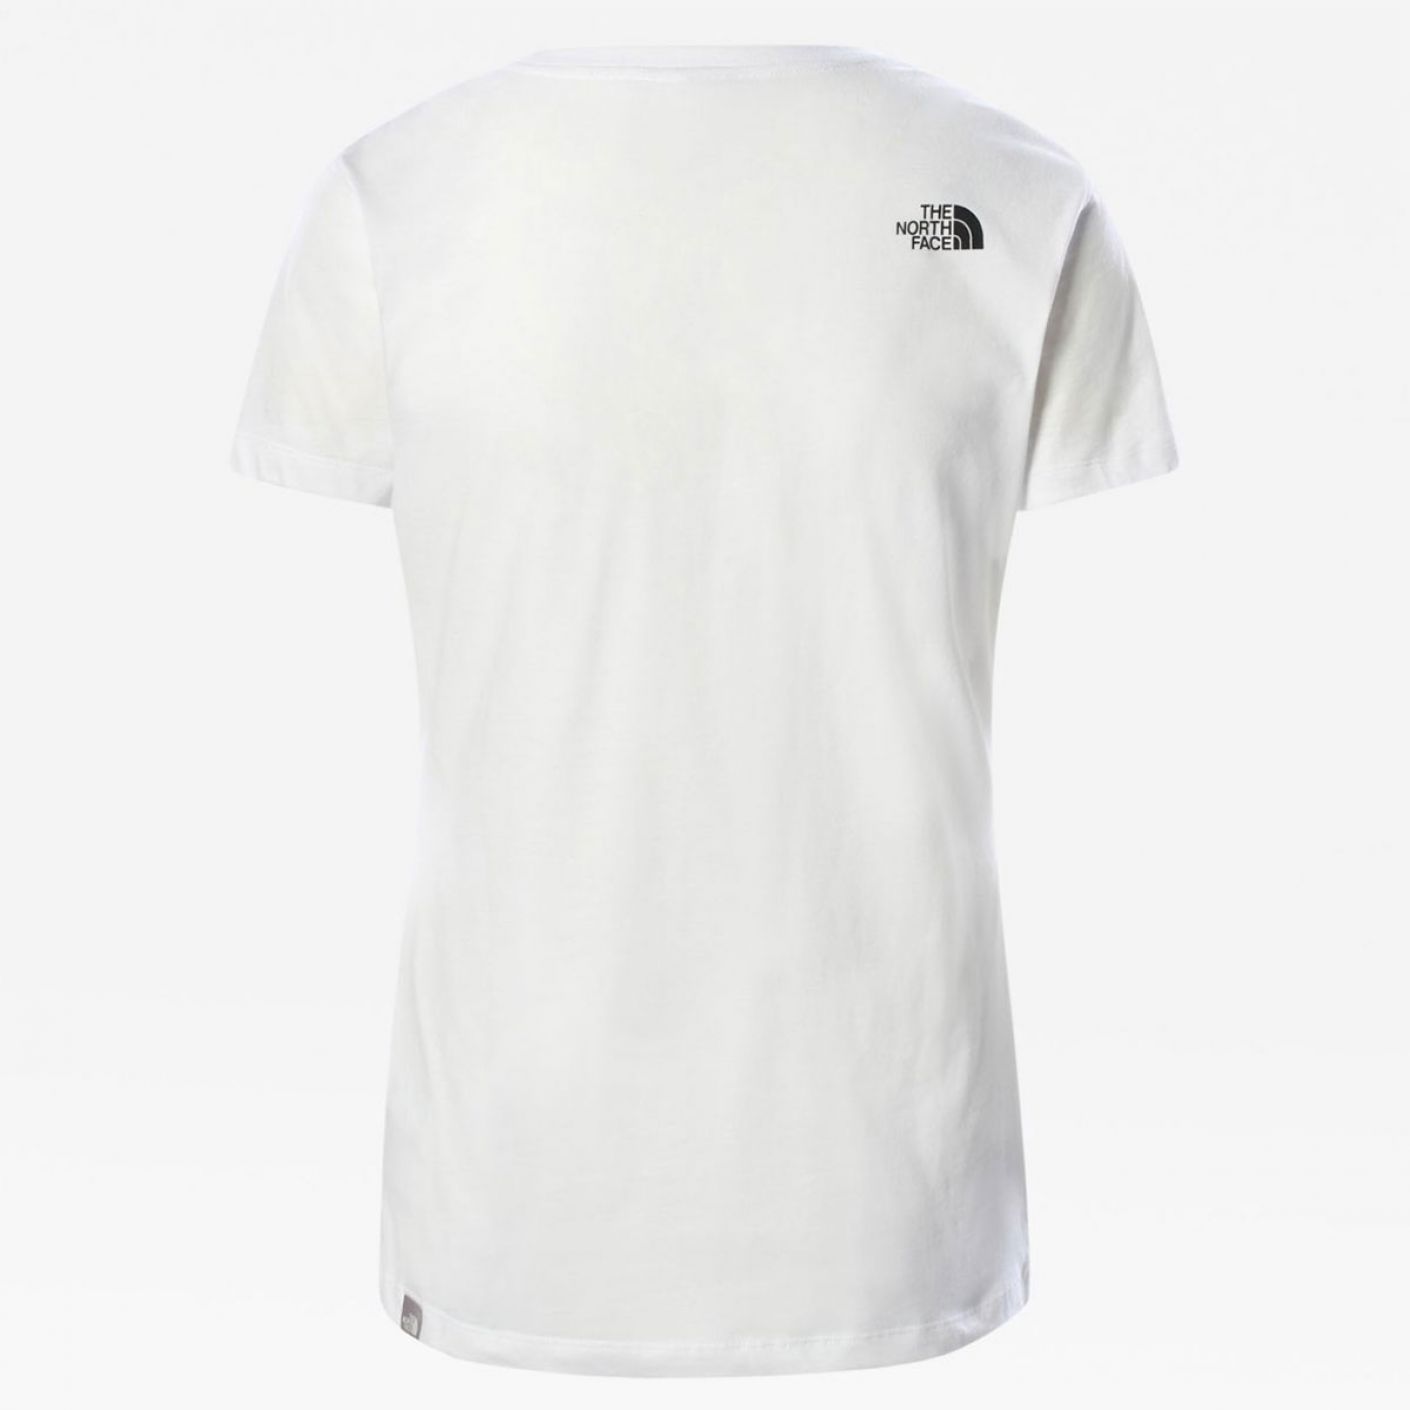 The North Face Simple Dome White T-shirt